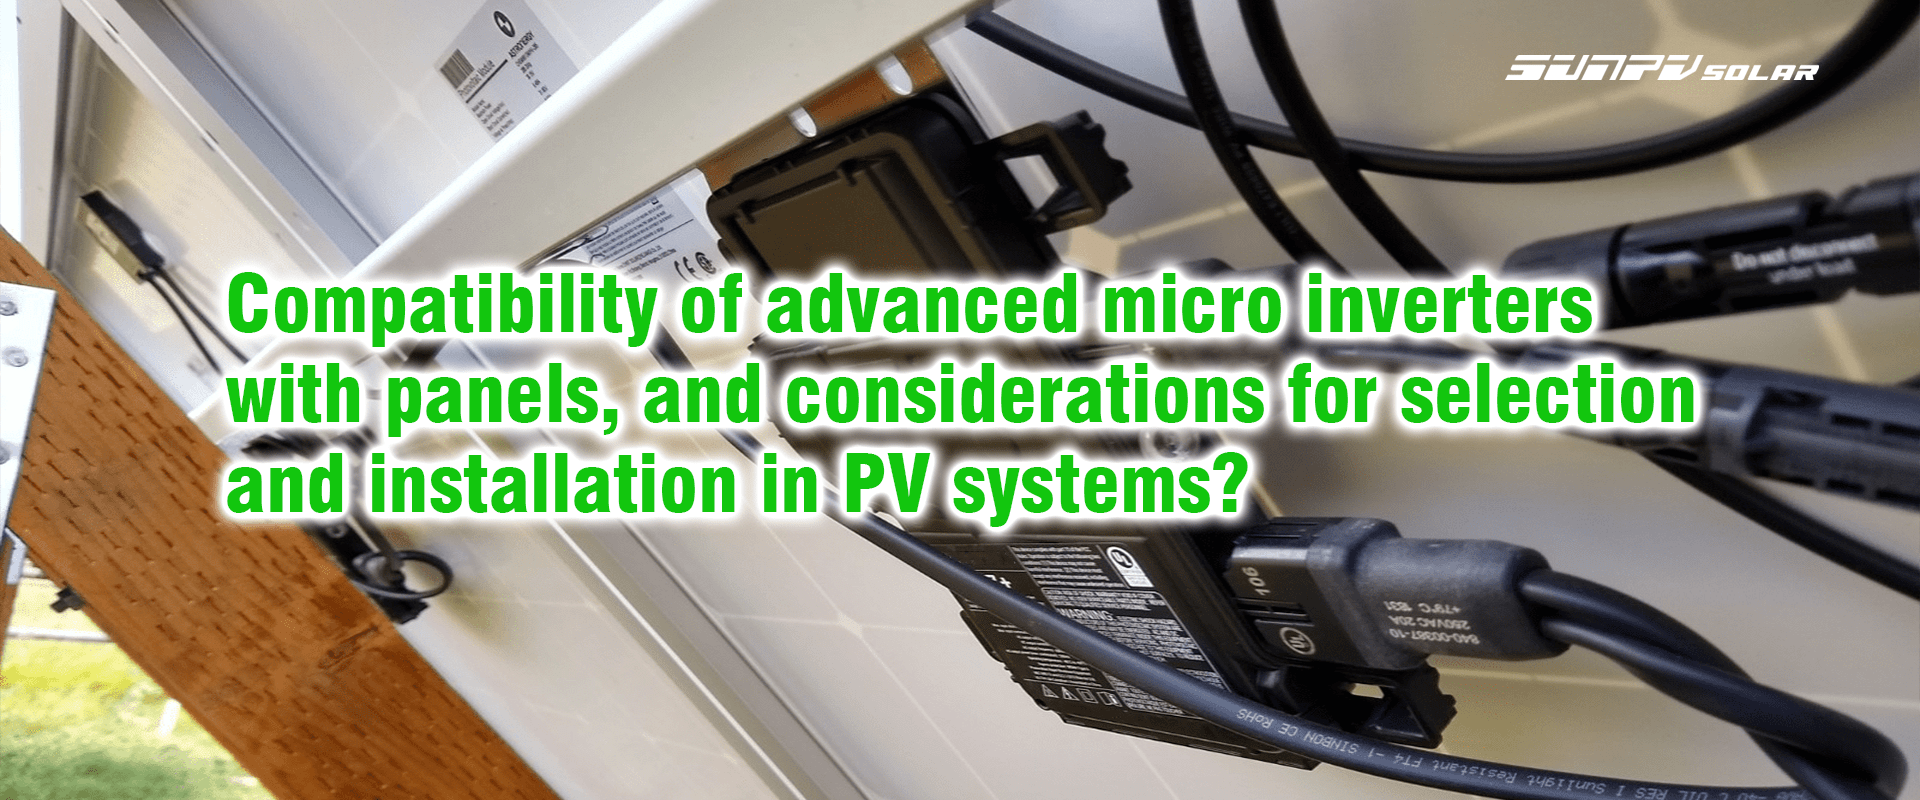 Compatibility of advanced micro inverters with panels, and considerations for selection and installation in PV systems?